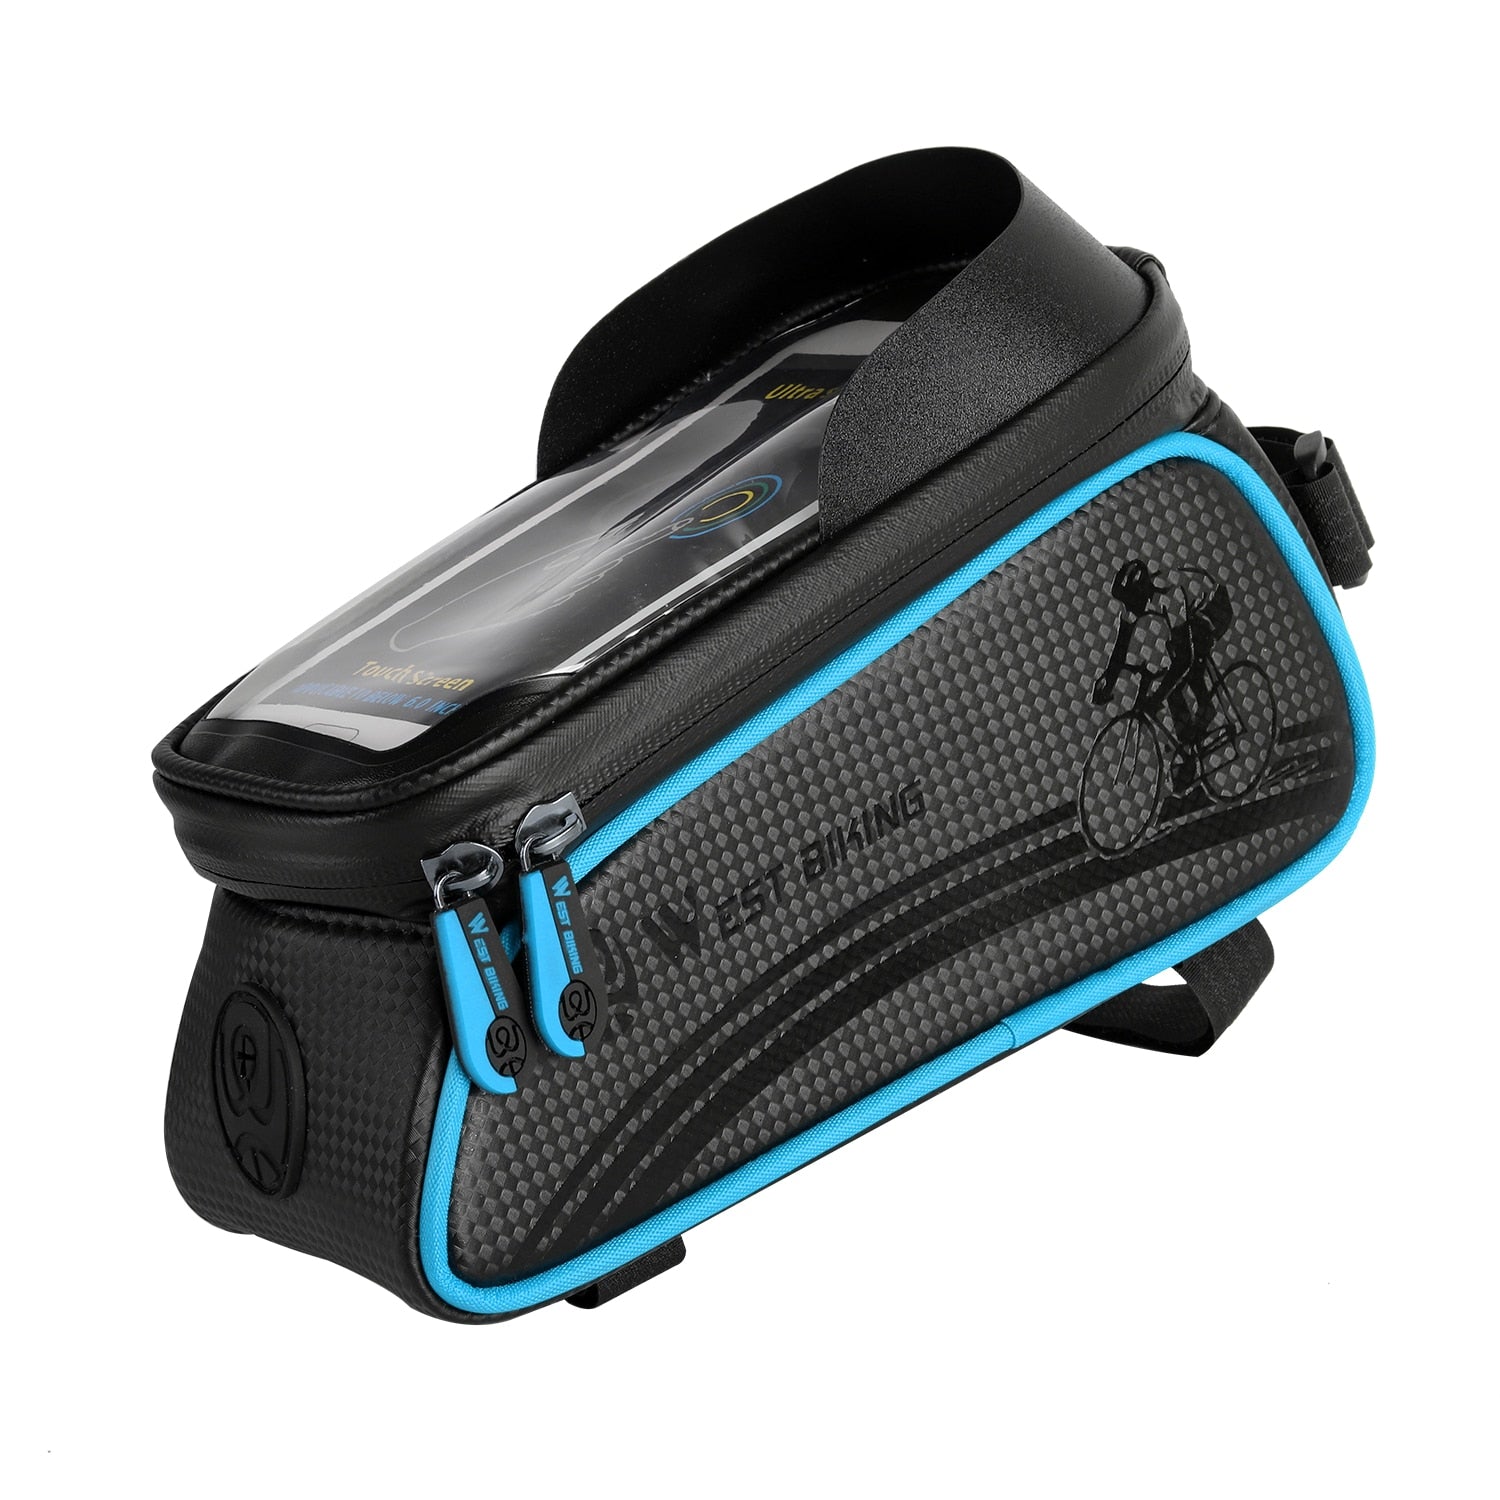 Bicycle Bag Cycling Top Front Tube Frame Bag Waterproof 6.5 Inches Touch Screen Phone Case Storage MTB Road Bike Bag